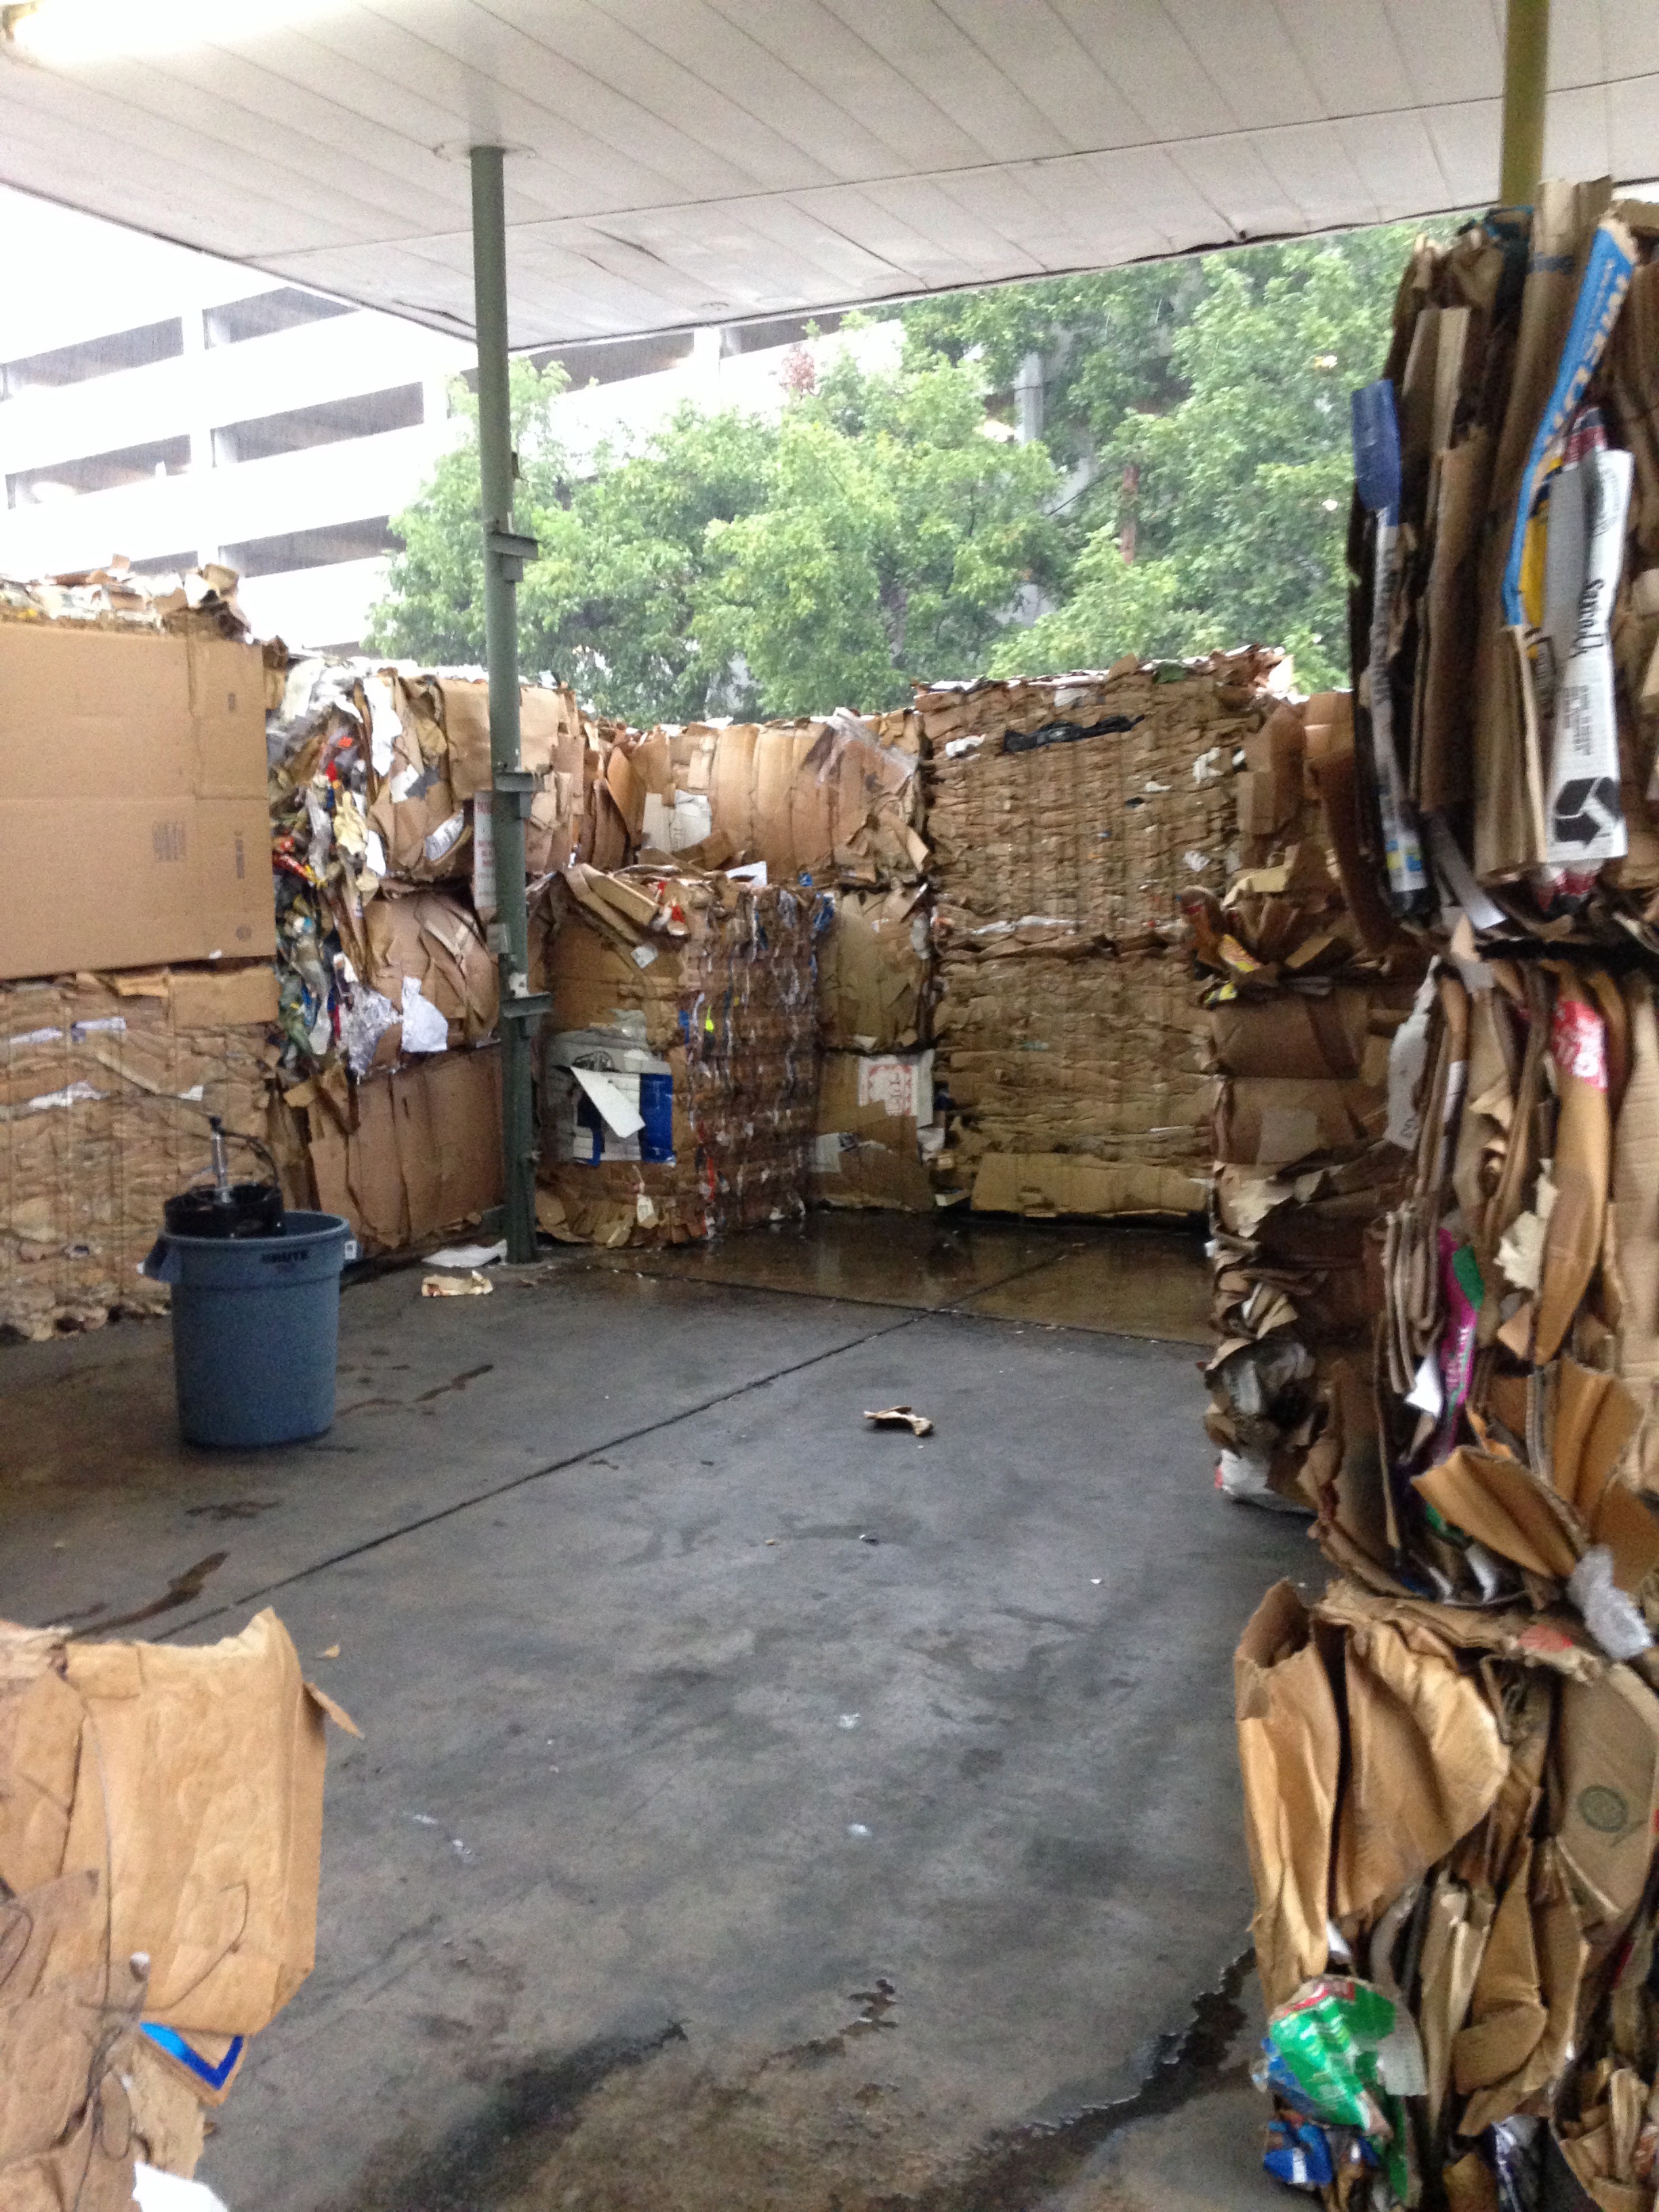  The exhibition space was constructed entirely out of 1200 lb bales of OCC (the recycling industry term for old corrugated cardboard/containers) underneath the awning of the recycling center. 